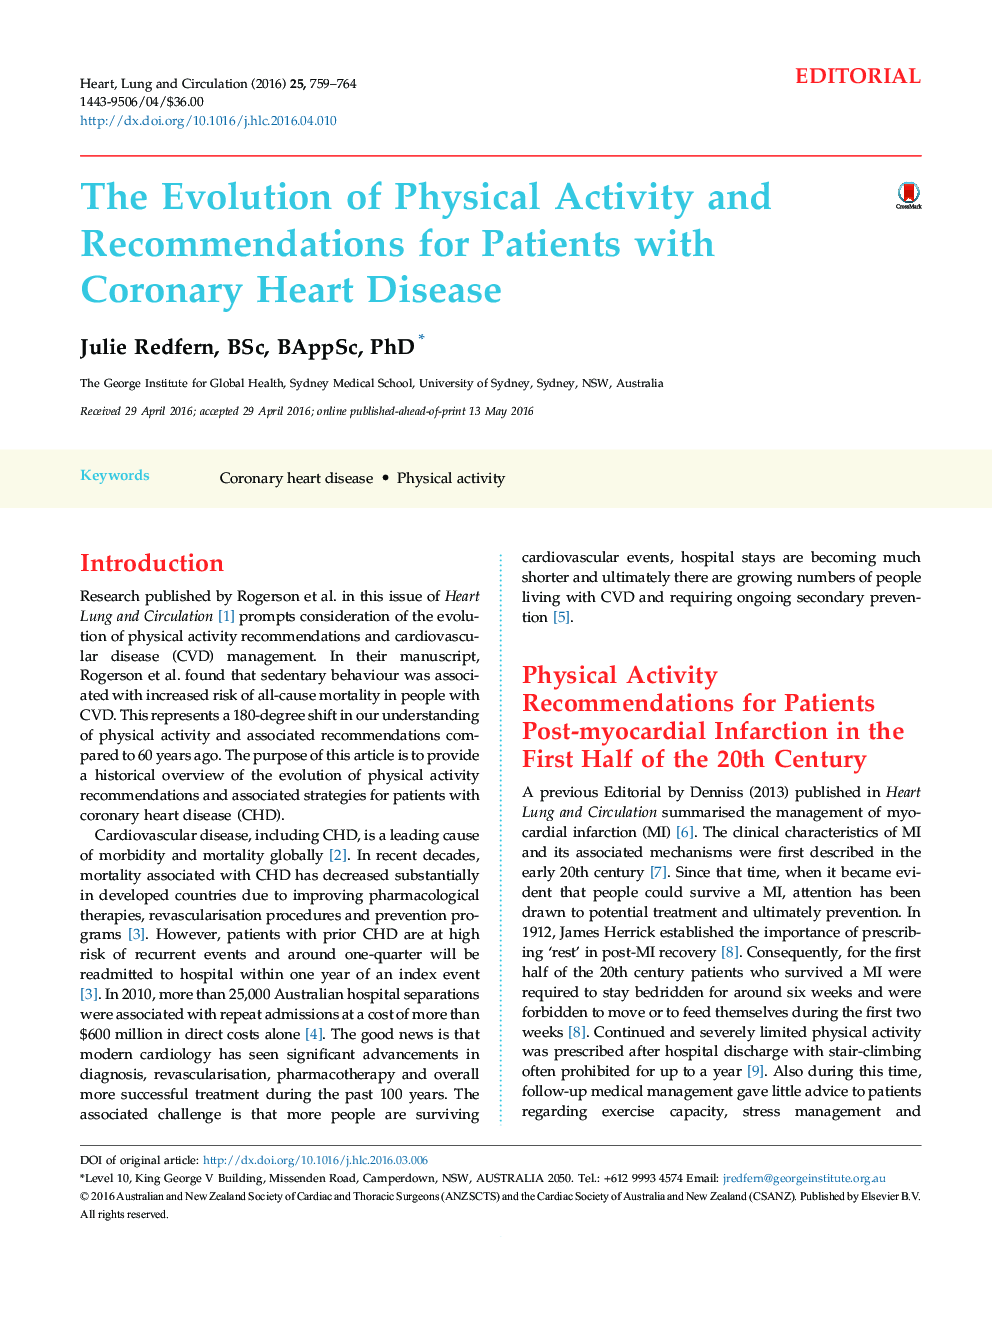 The Evolution of Physical Activity and Recommendations for Patients with Coronary Heart Disease